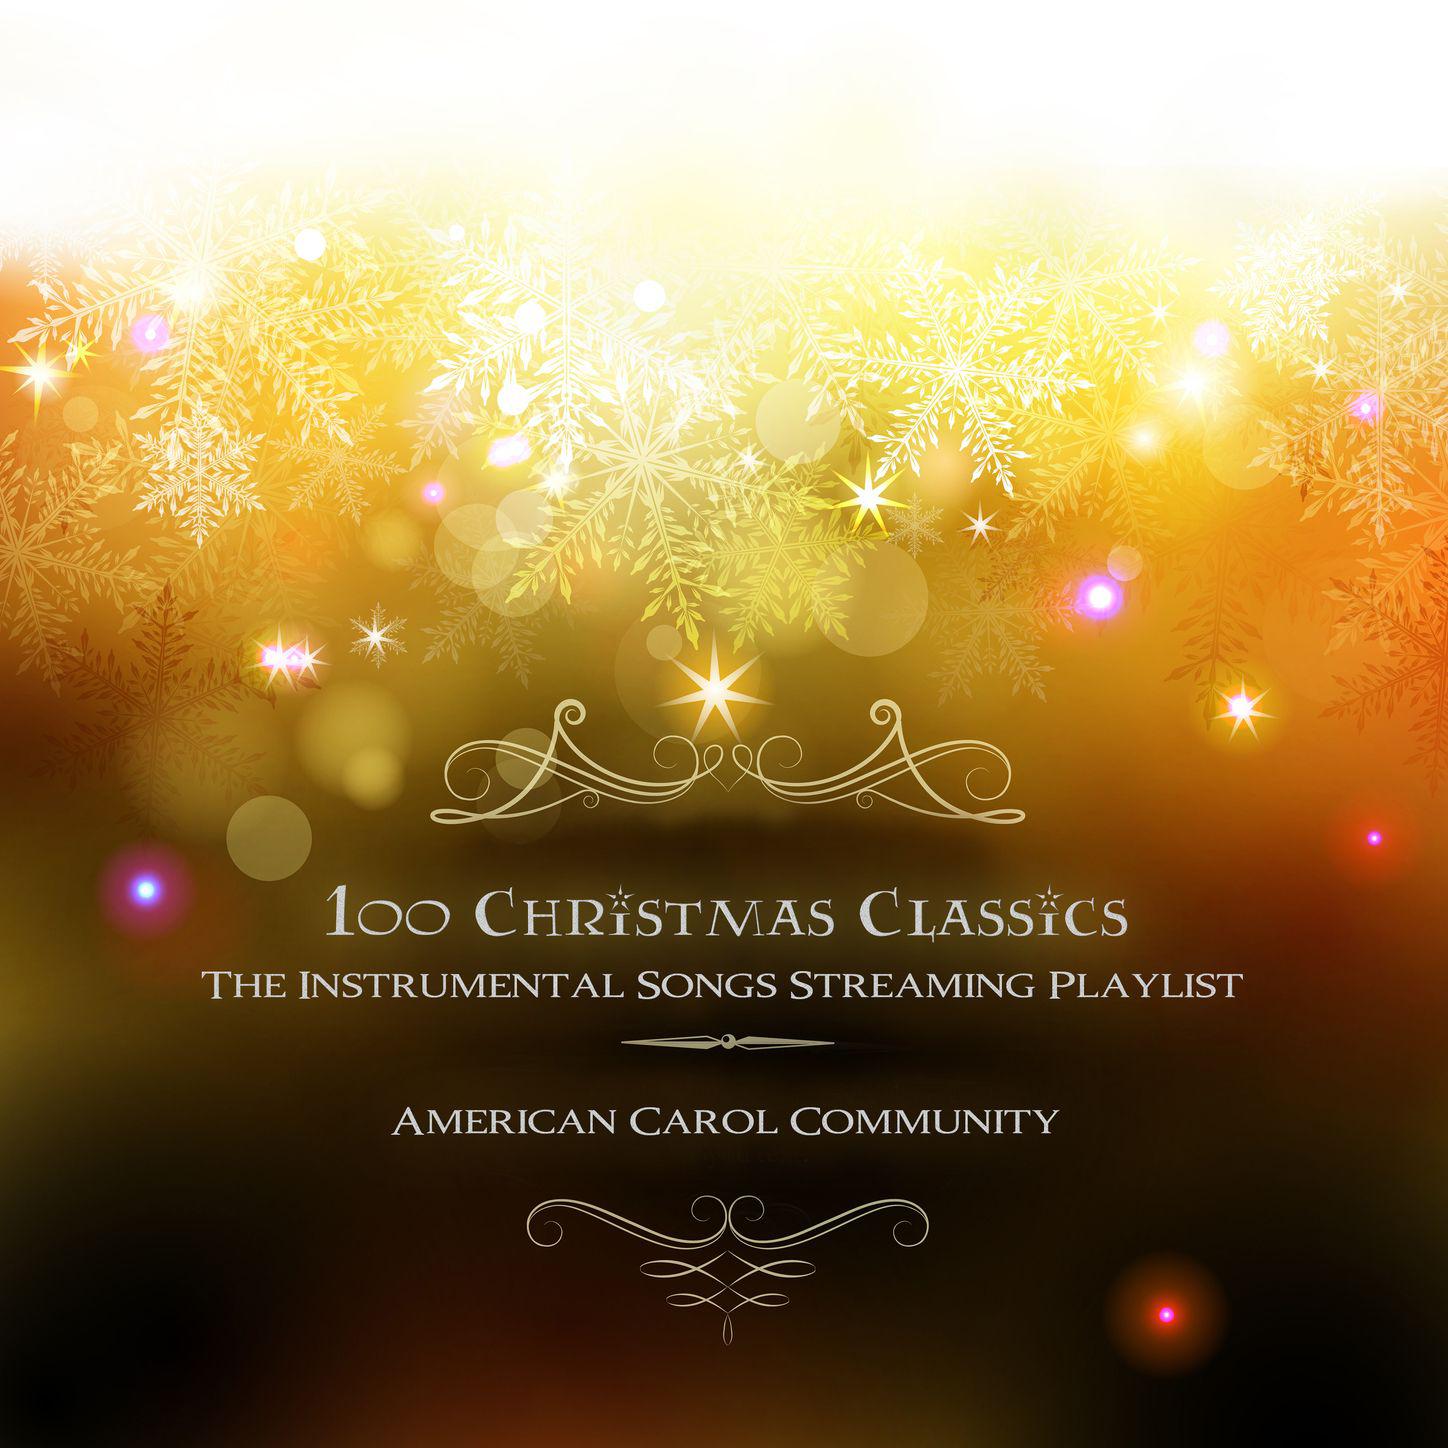 100 Christmas Classics - The Instrumental Songs Streaming Playlist